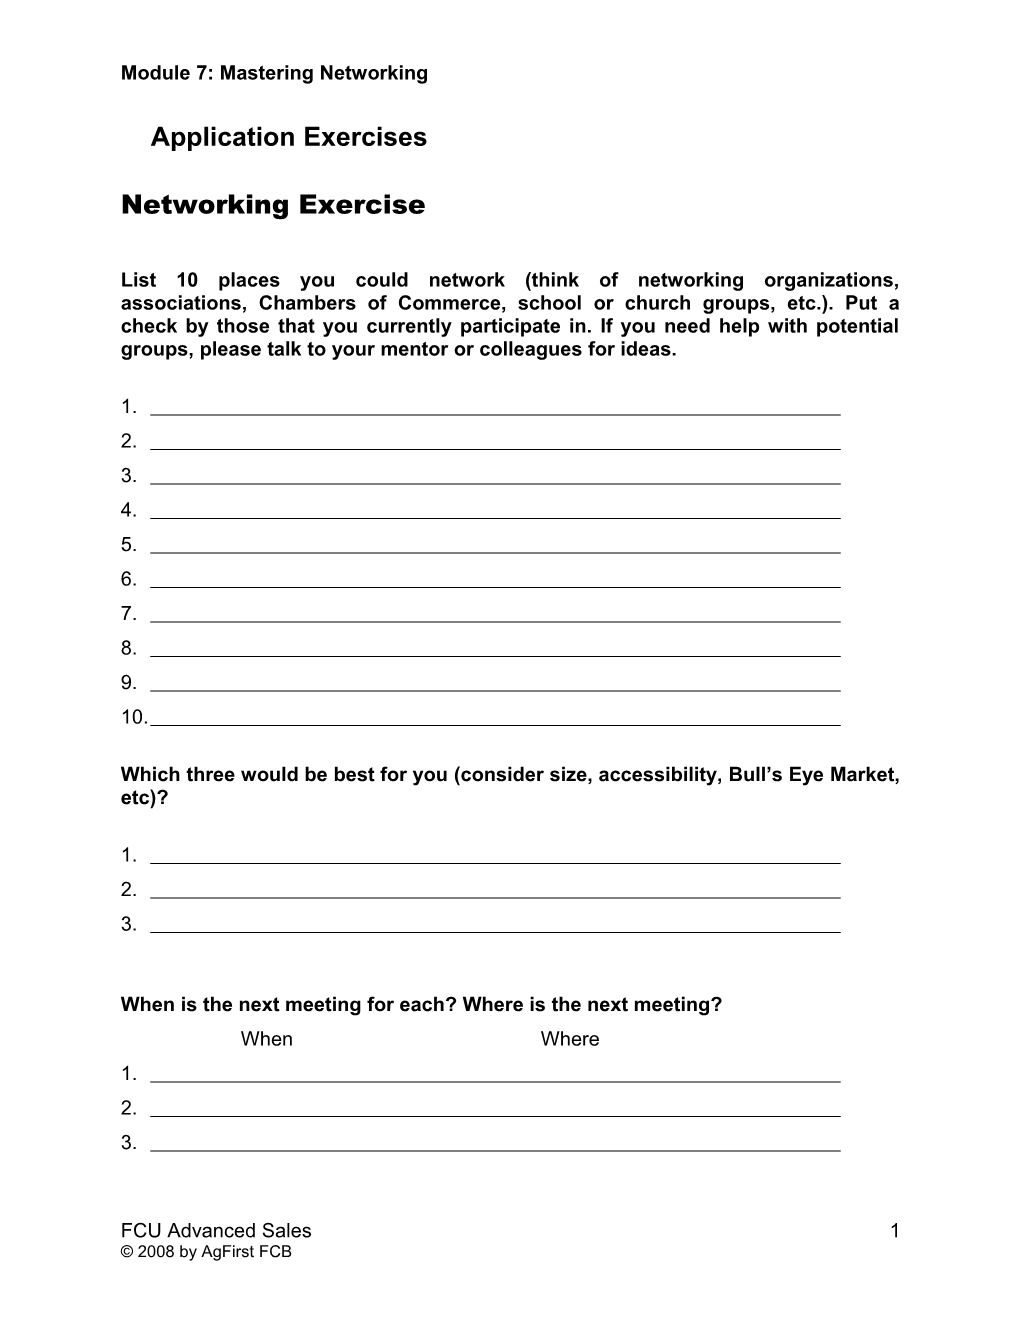 Module 7: Mastering Networking